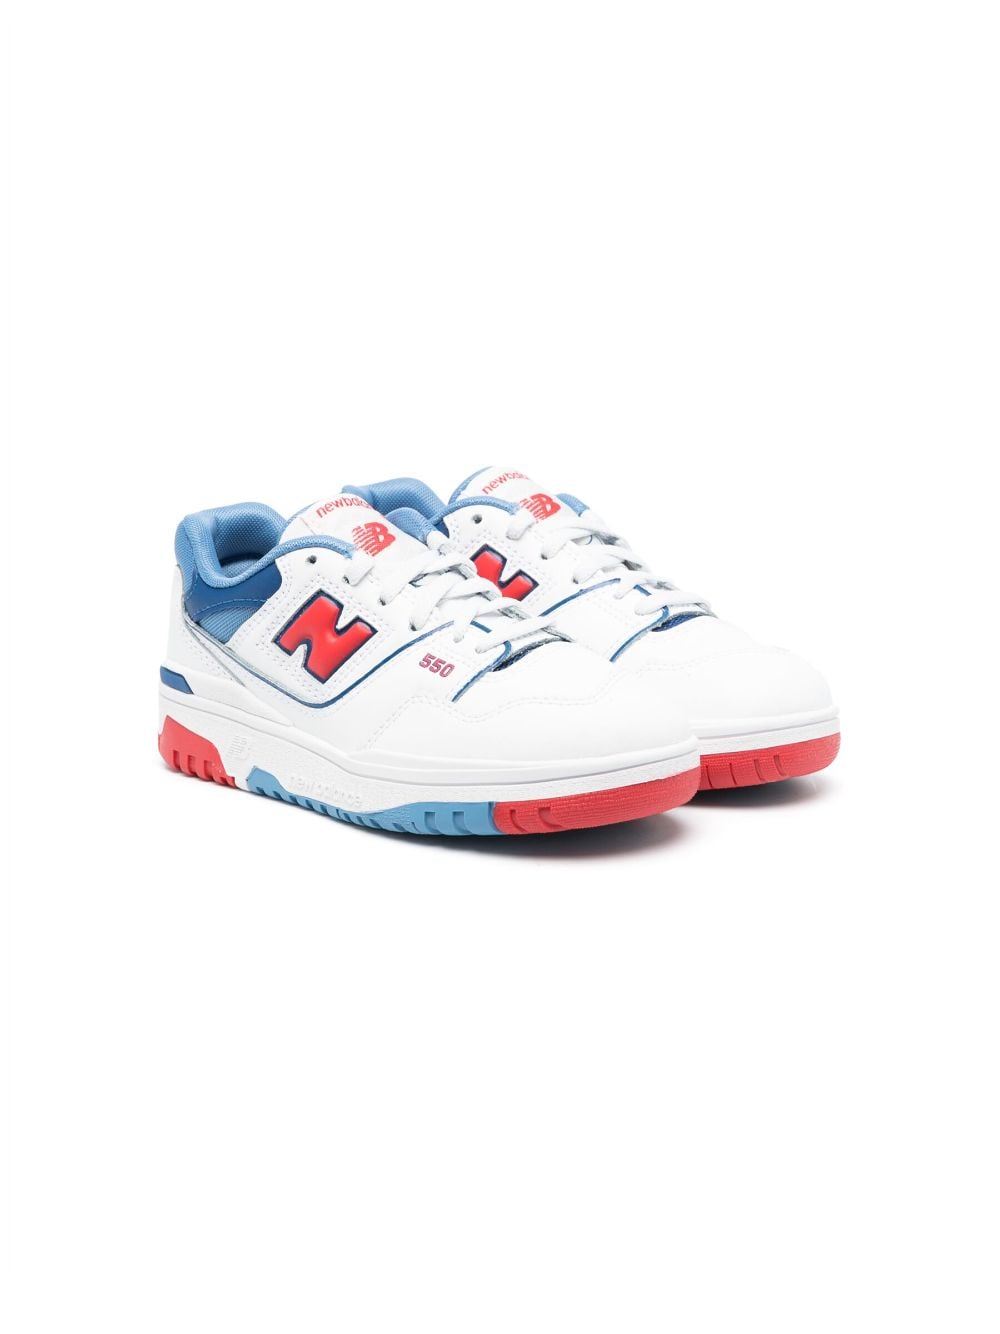 New Balance Kids round-toe lace-up sneakers - White